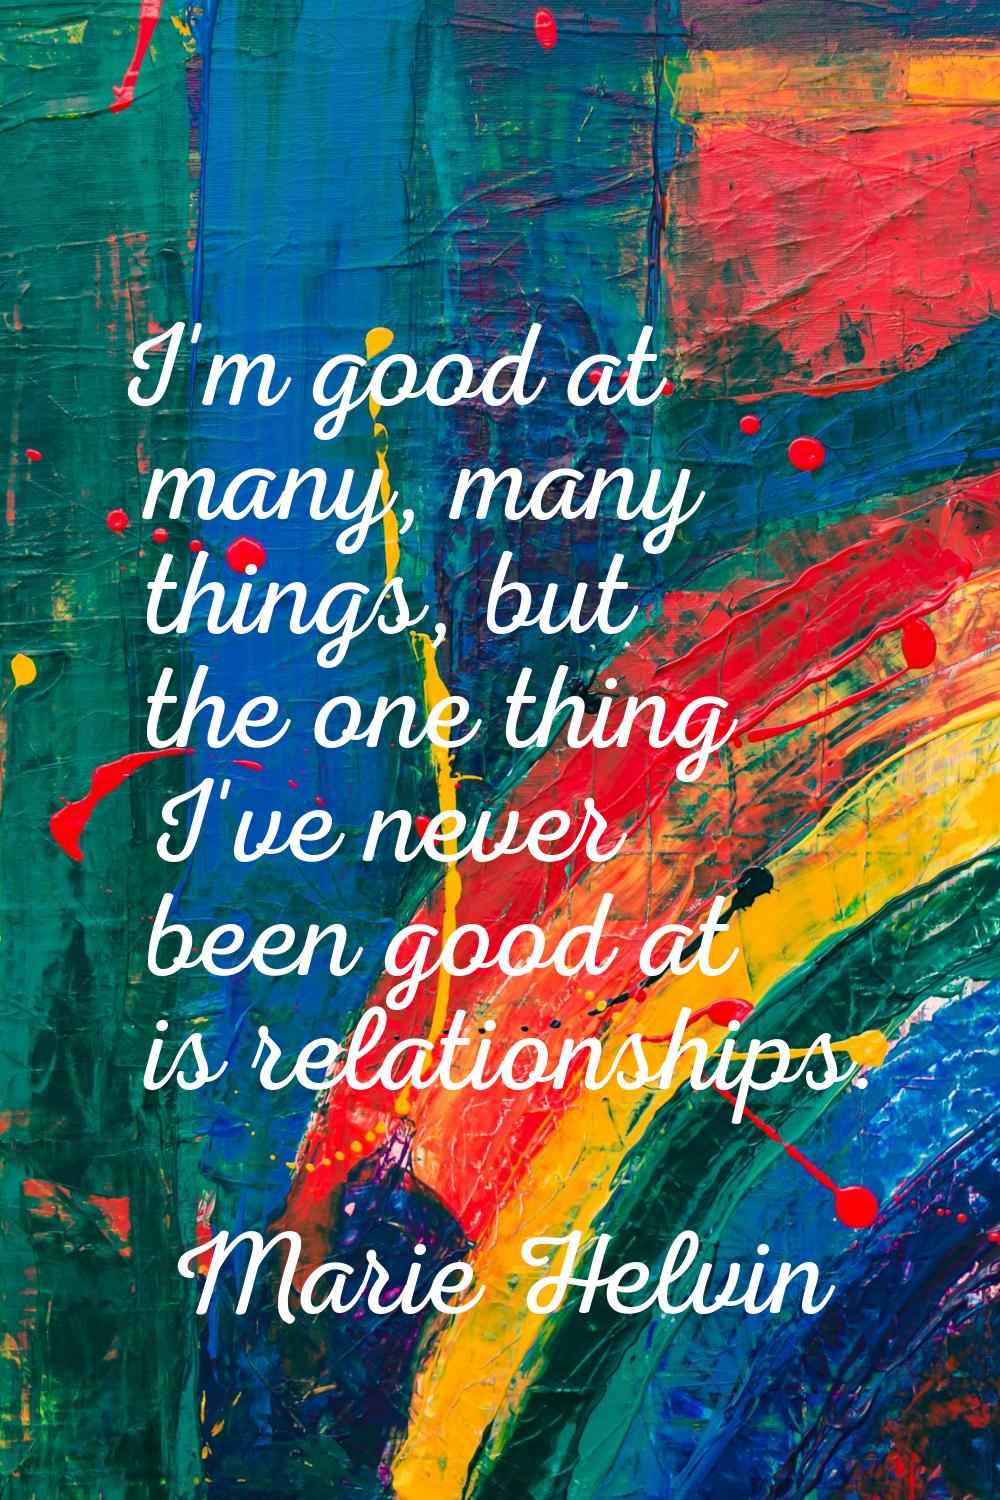 I'm good at many, many things, but the one thing I've never been good at is relationships.